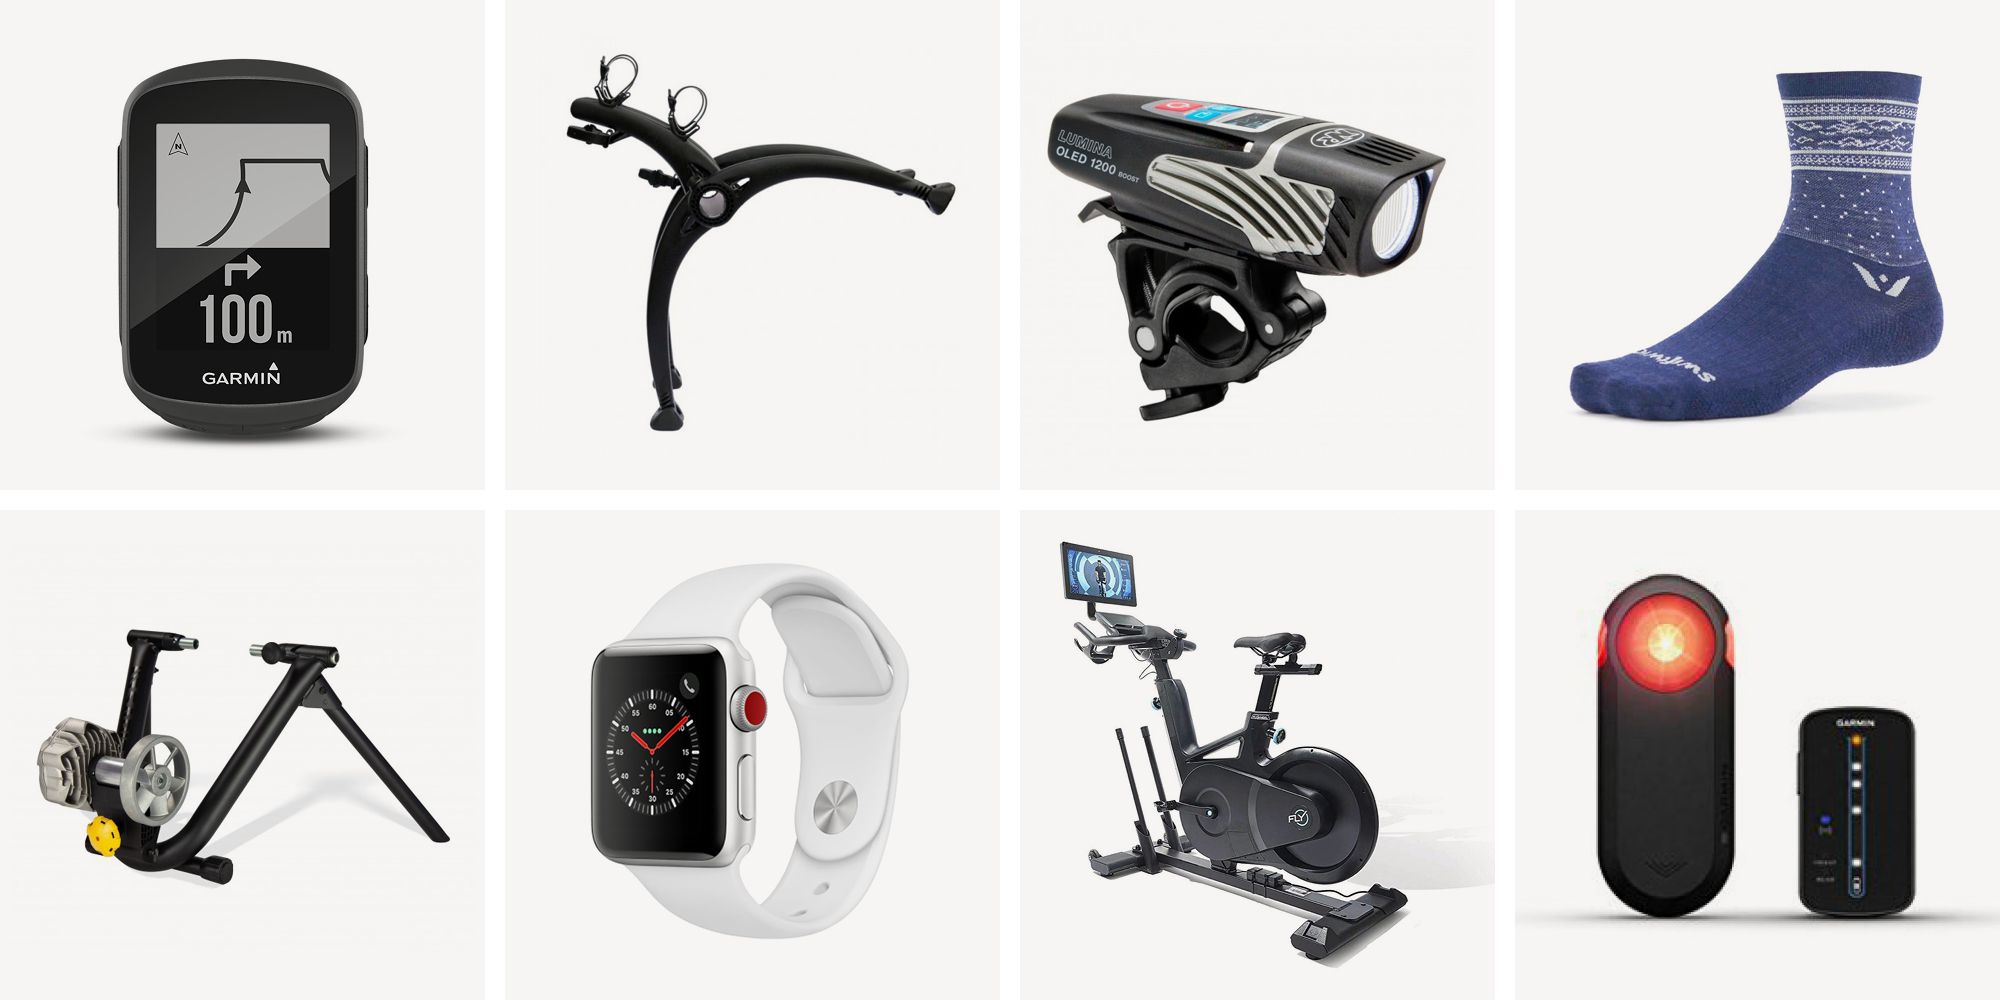 black friday bicycle deals